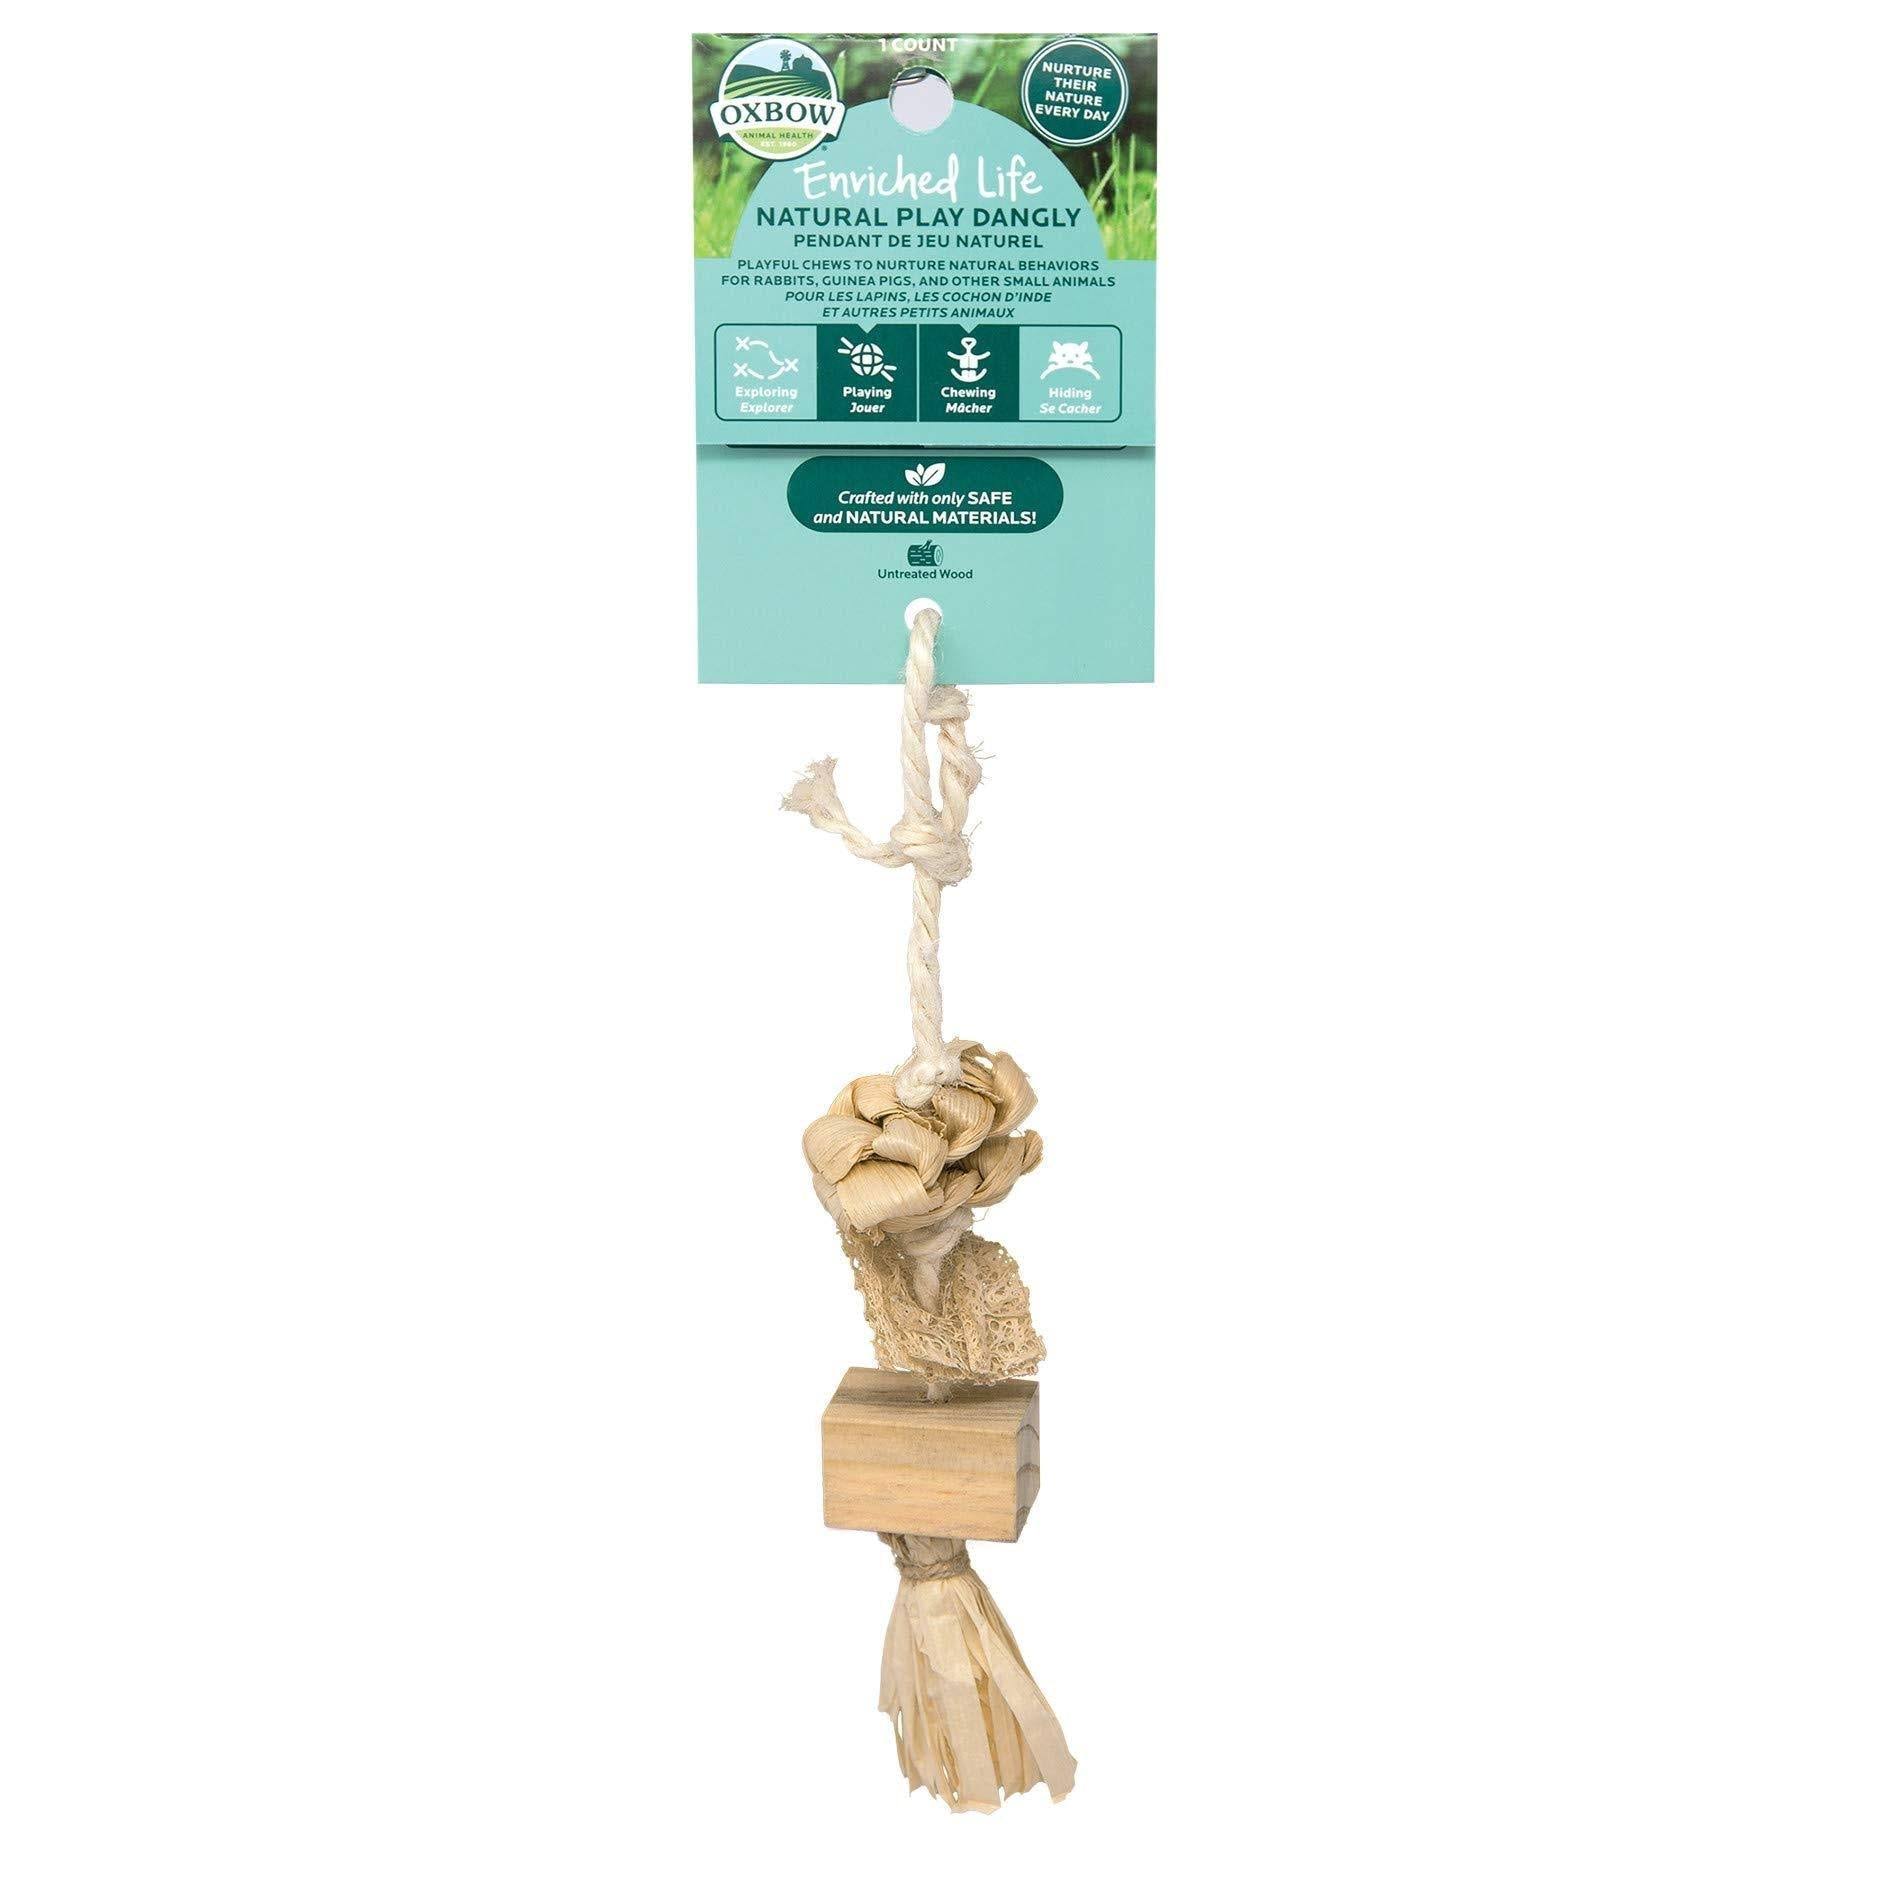 Oxbow Enriched Life Natural Play Dangly for Small Animals